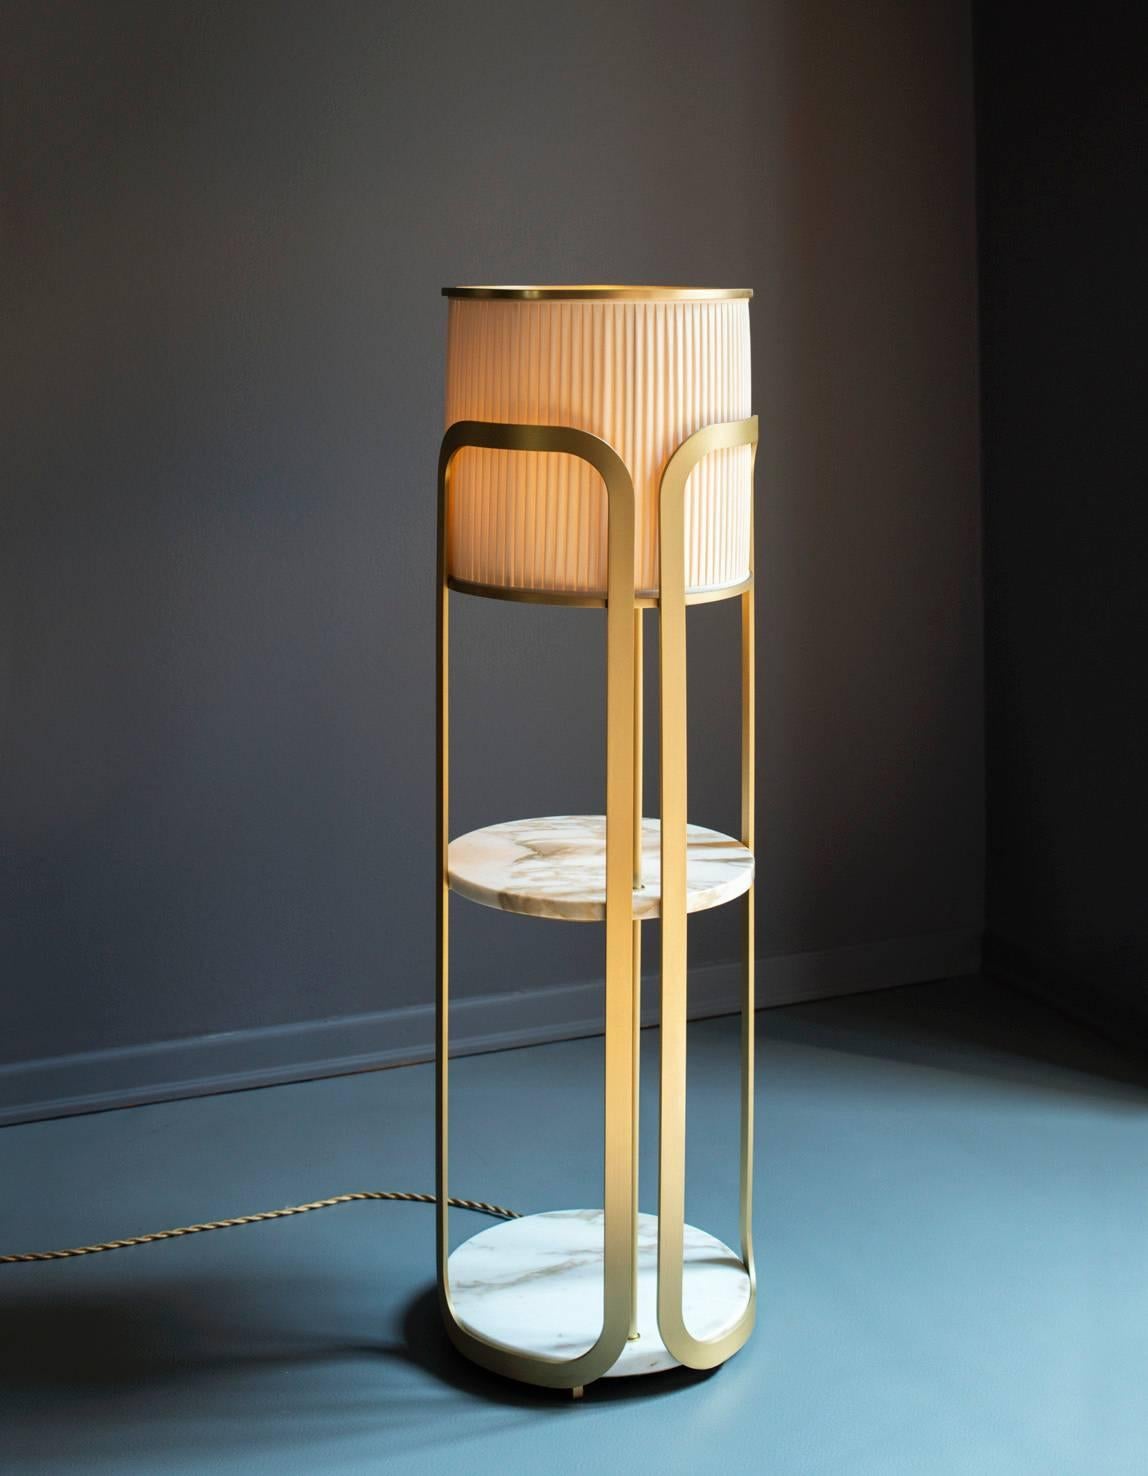 MEGAN lamp and side table  design by Lazzarini & Pickering 
matte brass frame - calcatta marble - silk shade 
manifactured by Marta Sala éditions ( MSE') 
Italy 2015

Available in three finishes:
matte brass, polished brass, matte bronze